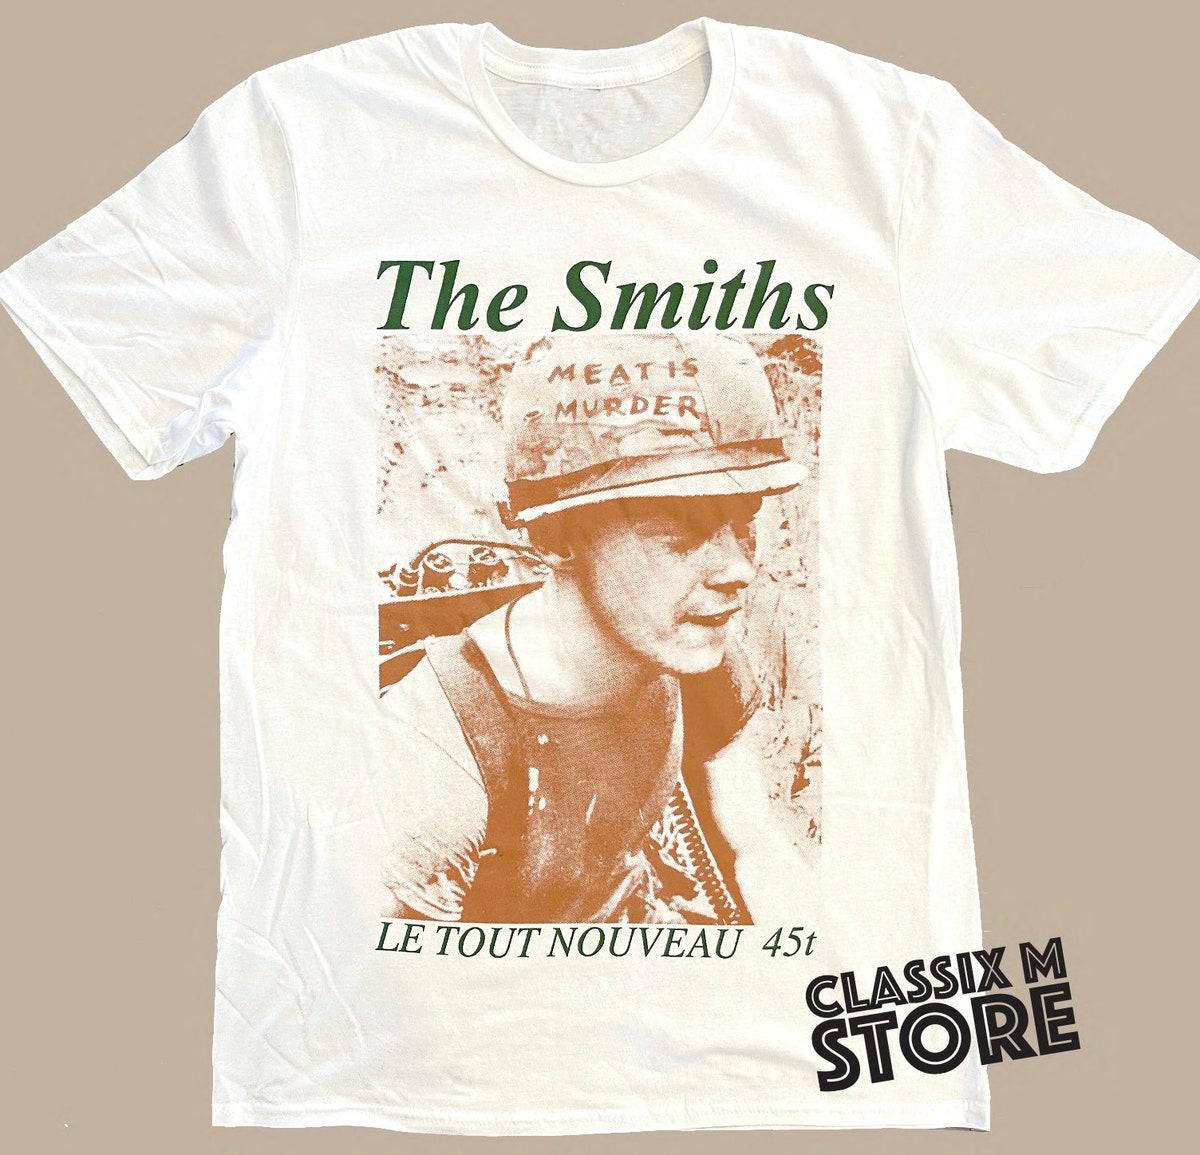 Shoplifters Of The World Unite The Smiths Vintage Black T-shirt For Rock Music Fans